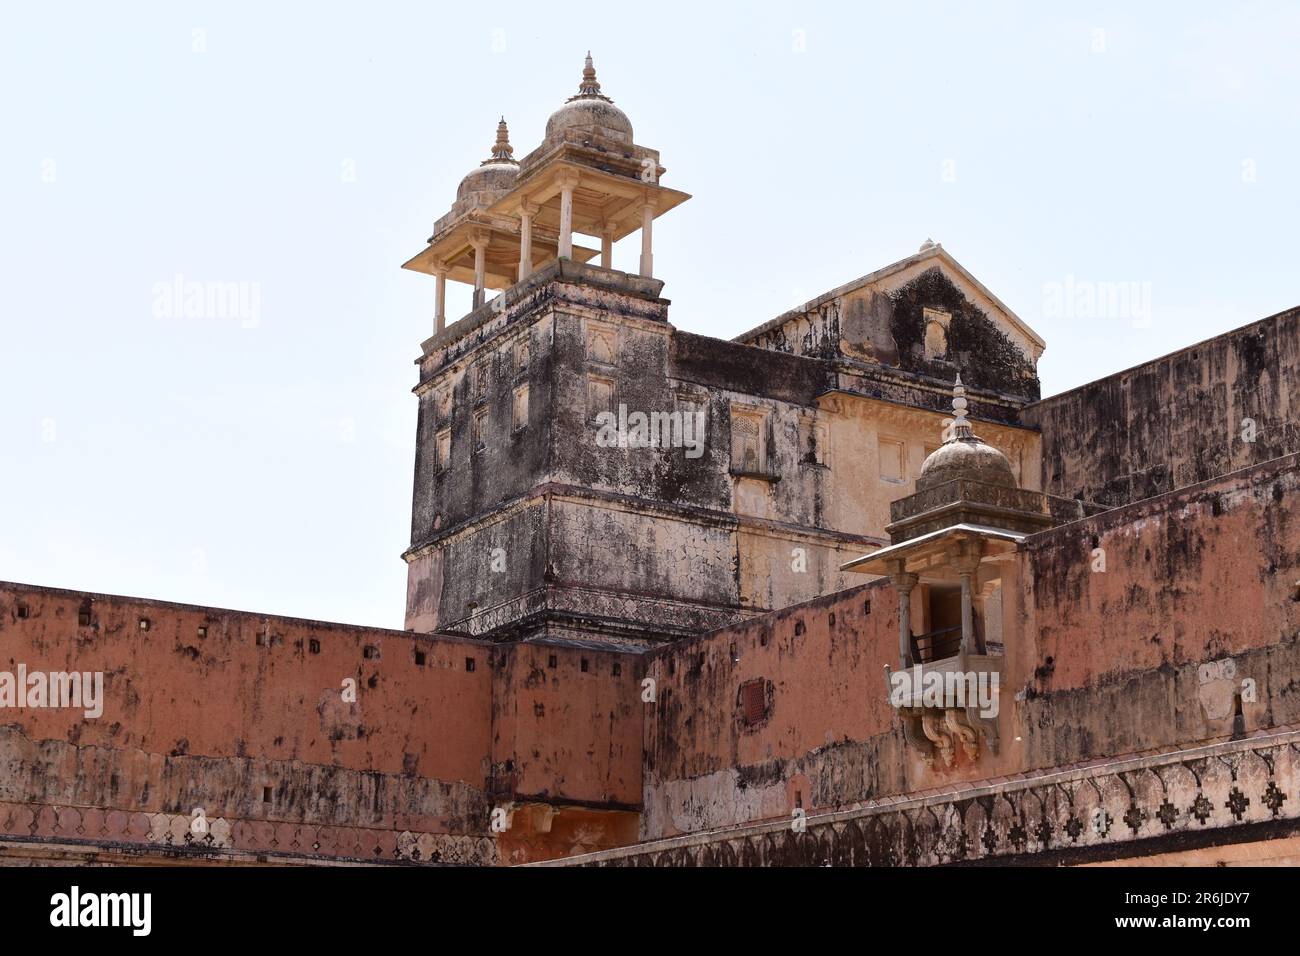 View of the fourth courtyard of Amber Palace, Rajasthan, India. Stock Photo